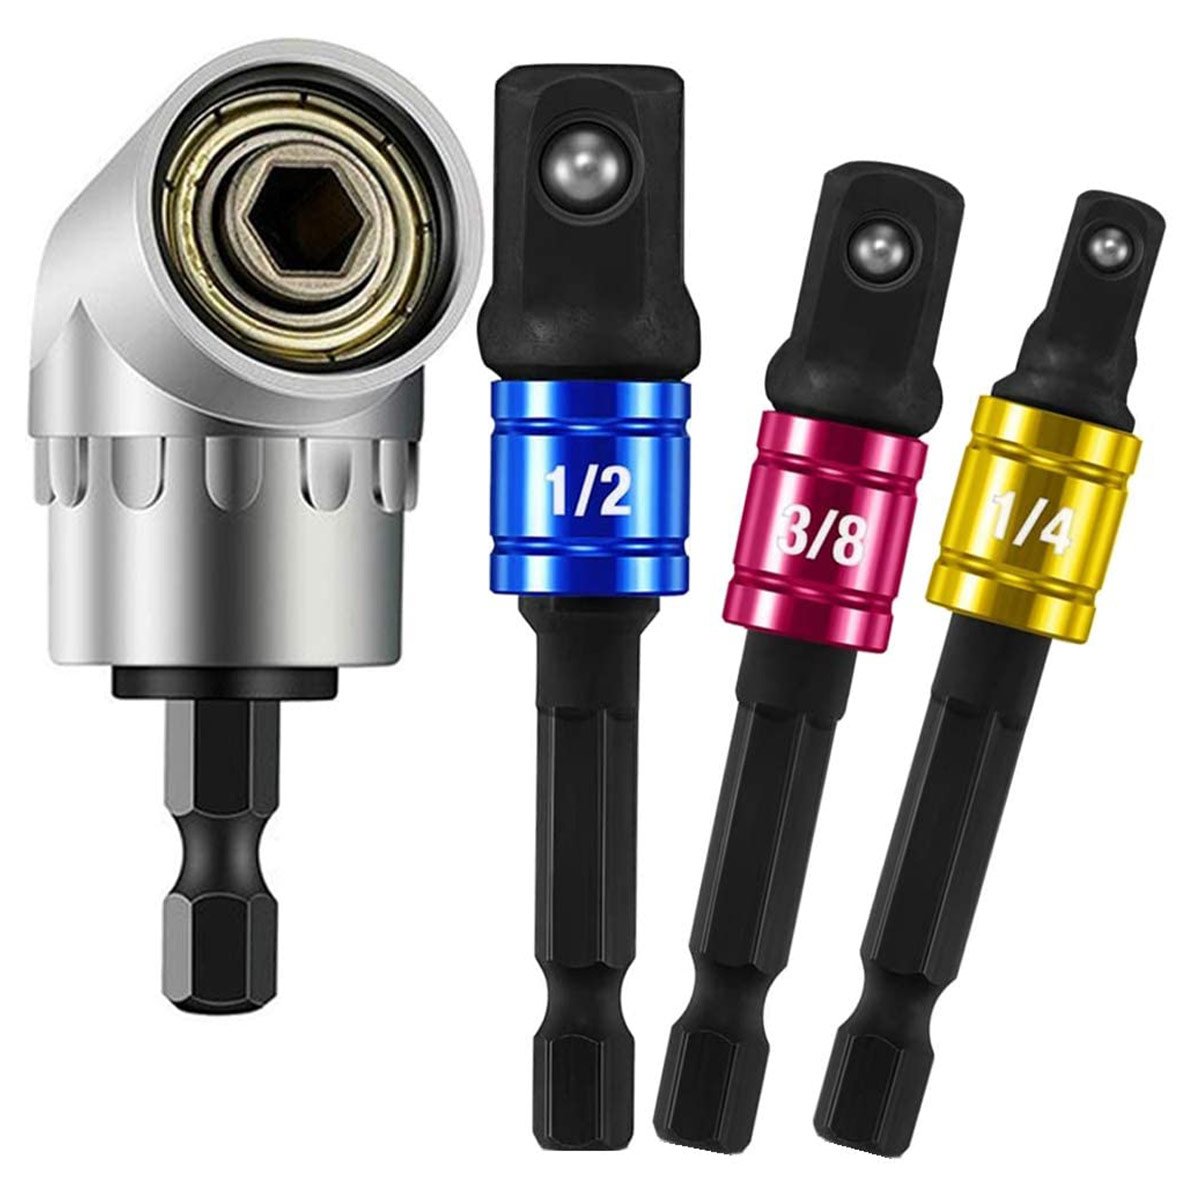 Hex Shank Socket Adapter with Color Coded 4pc Set